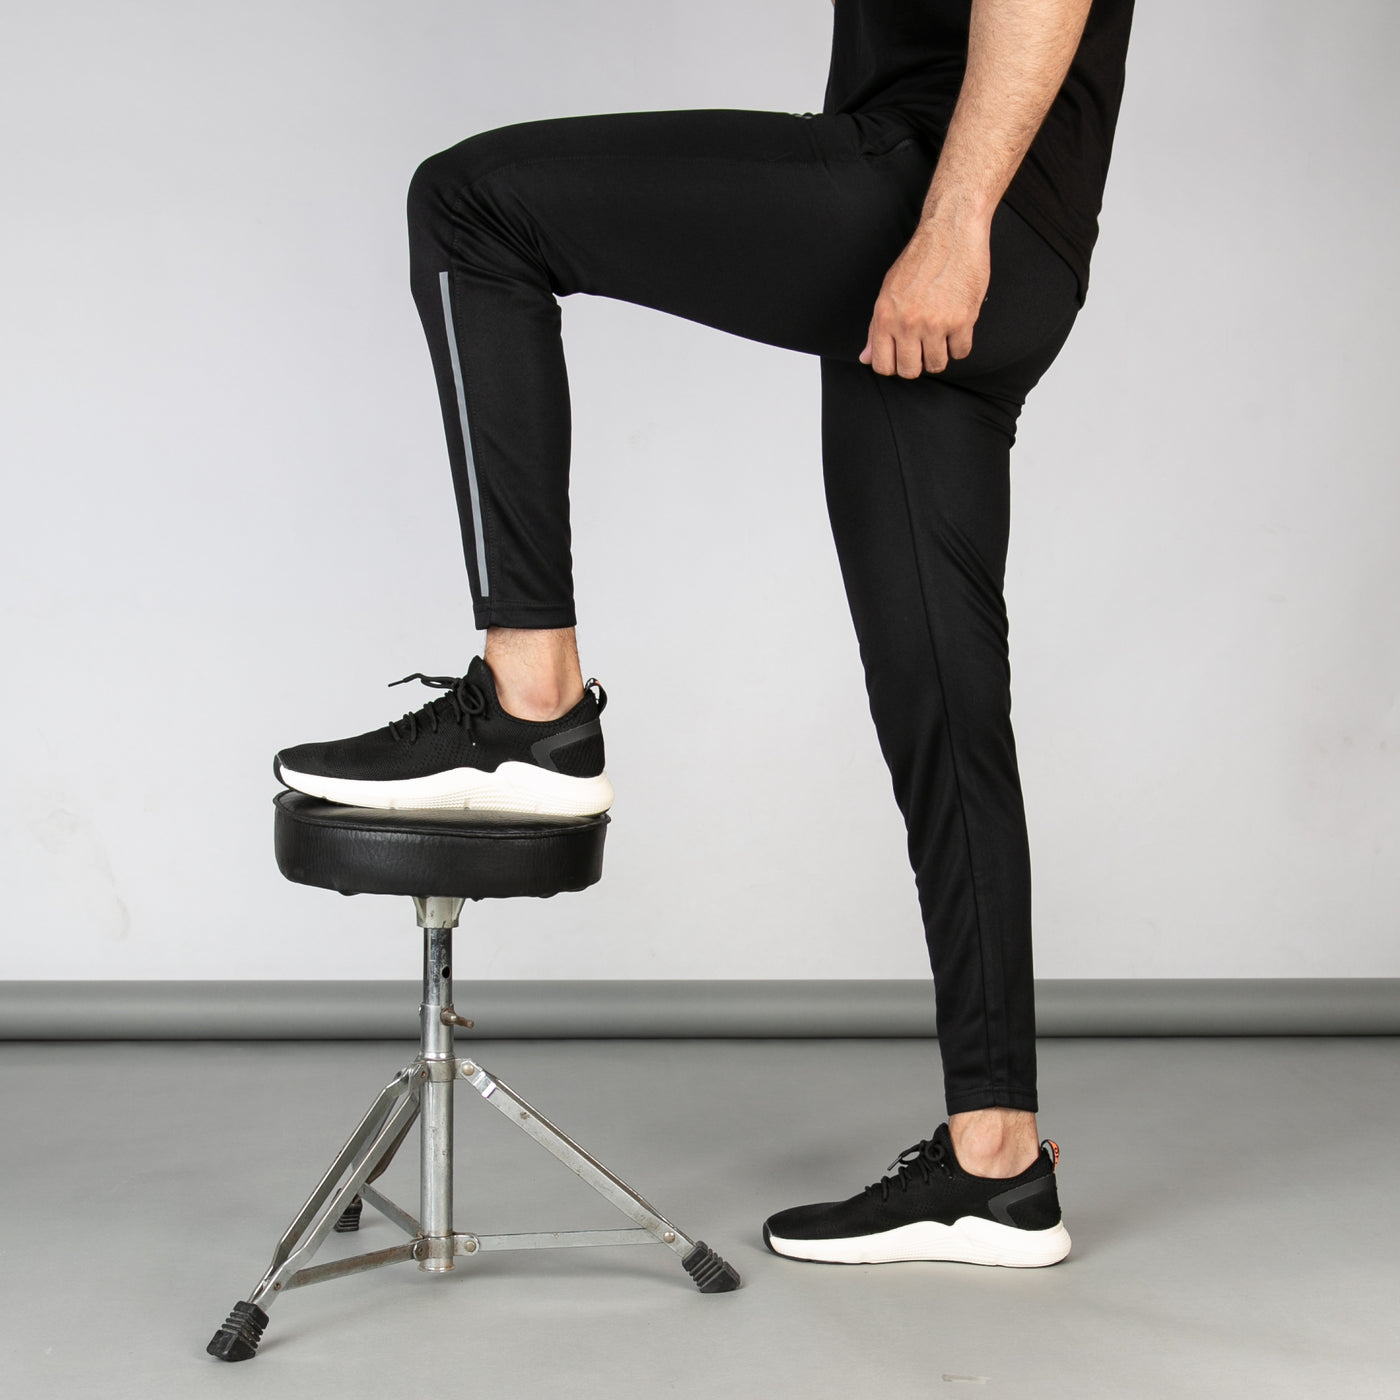 Black Quick Dry Bottoms with Thin Reflective Stripes